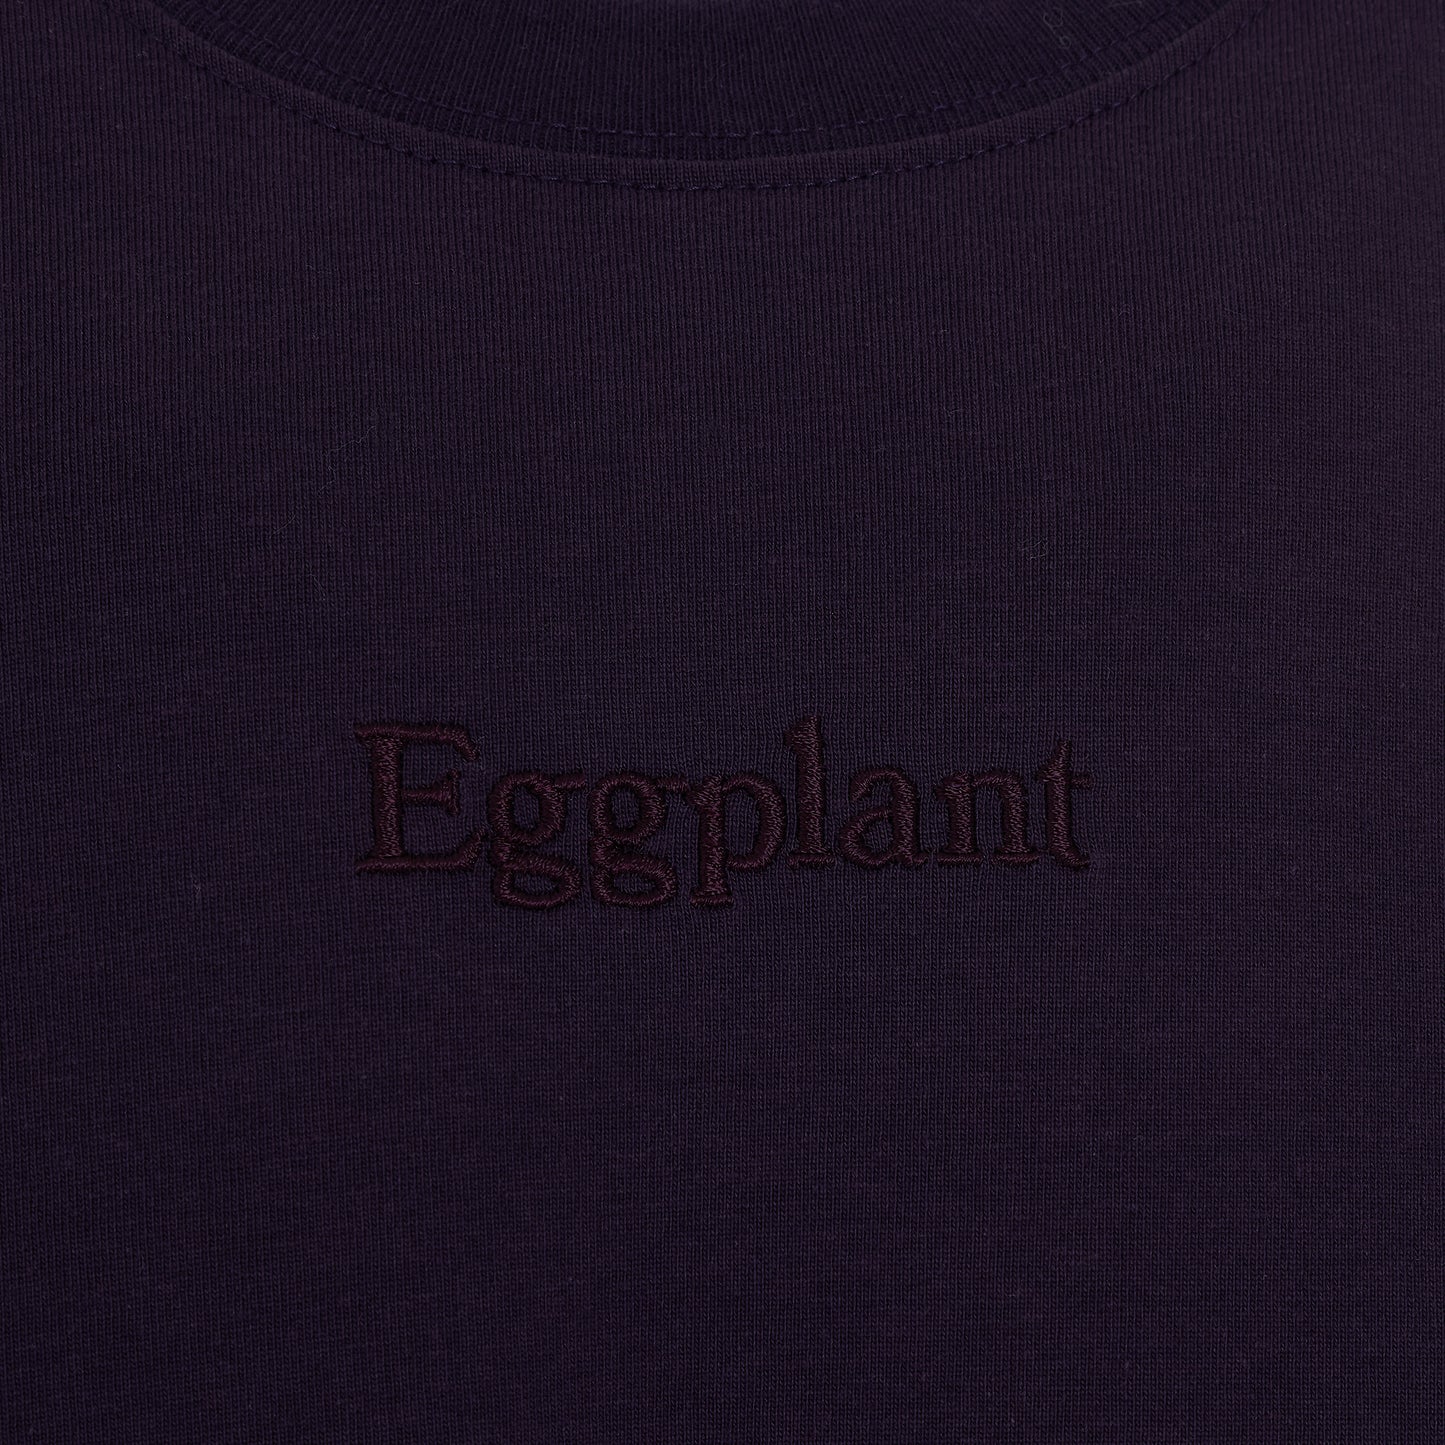 Vegetable Stem Embroidery T-Shirt in Eggplant